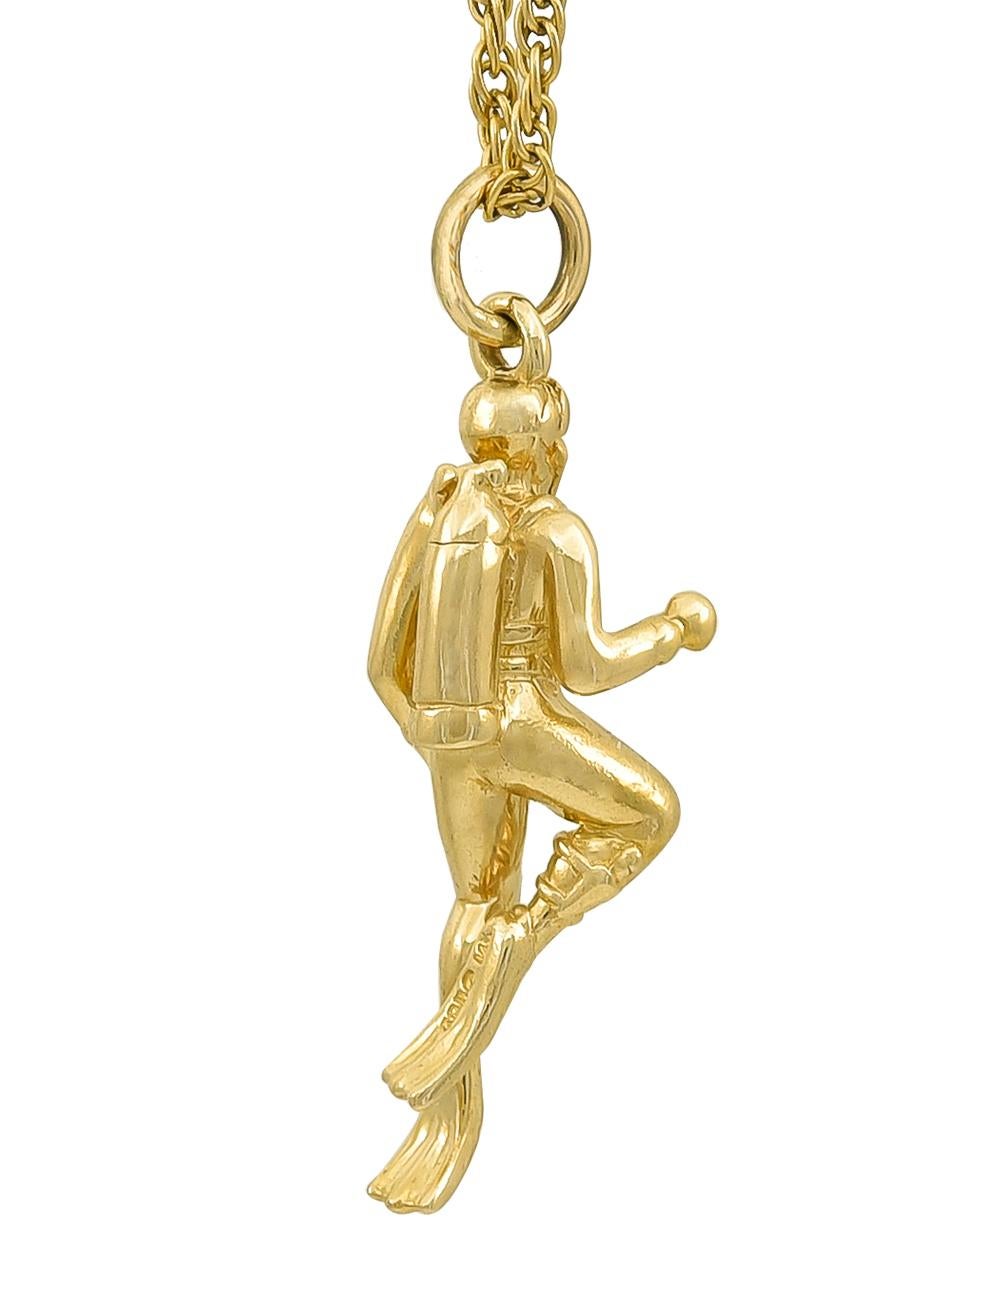 Super figural scuba diver charm, with tank and flippers.  Extra-heavy gauge 14K yellow gold.  1 1/4